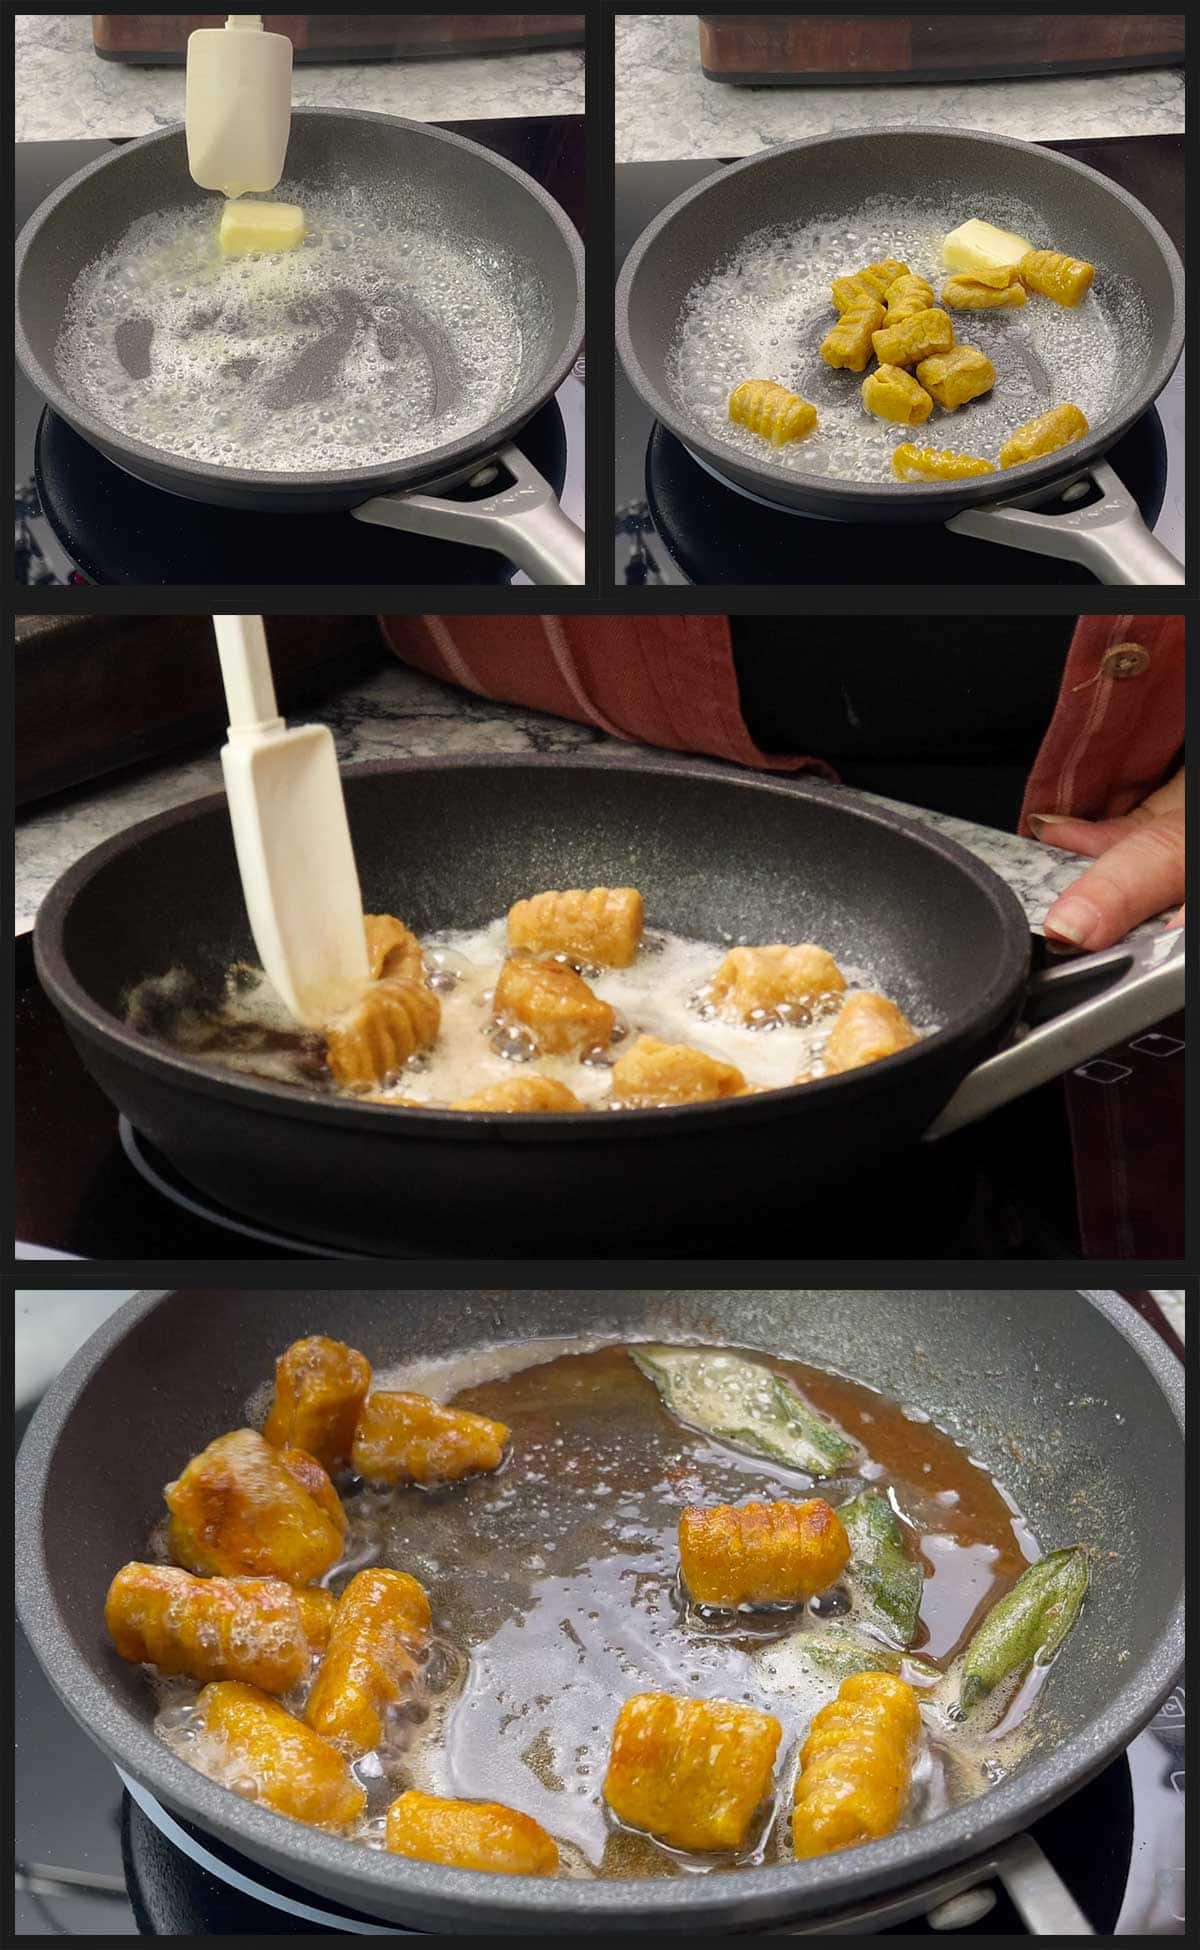 frying gnocchi in a pan on the stove with sage leaves and butter.